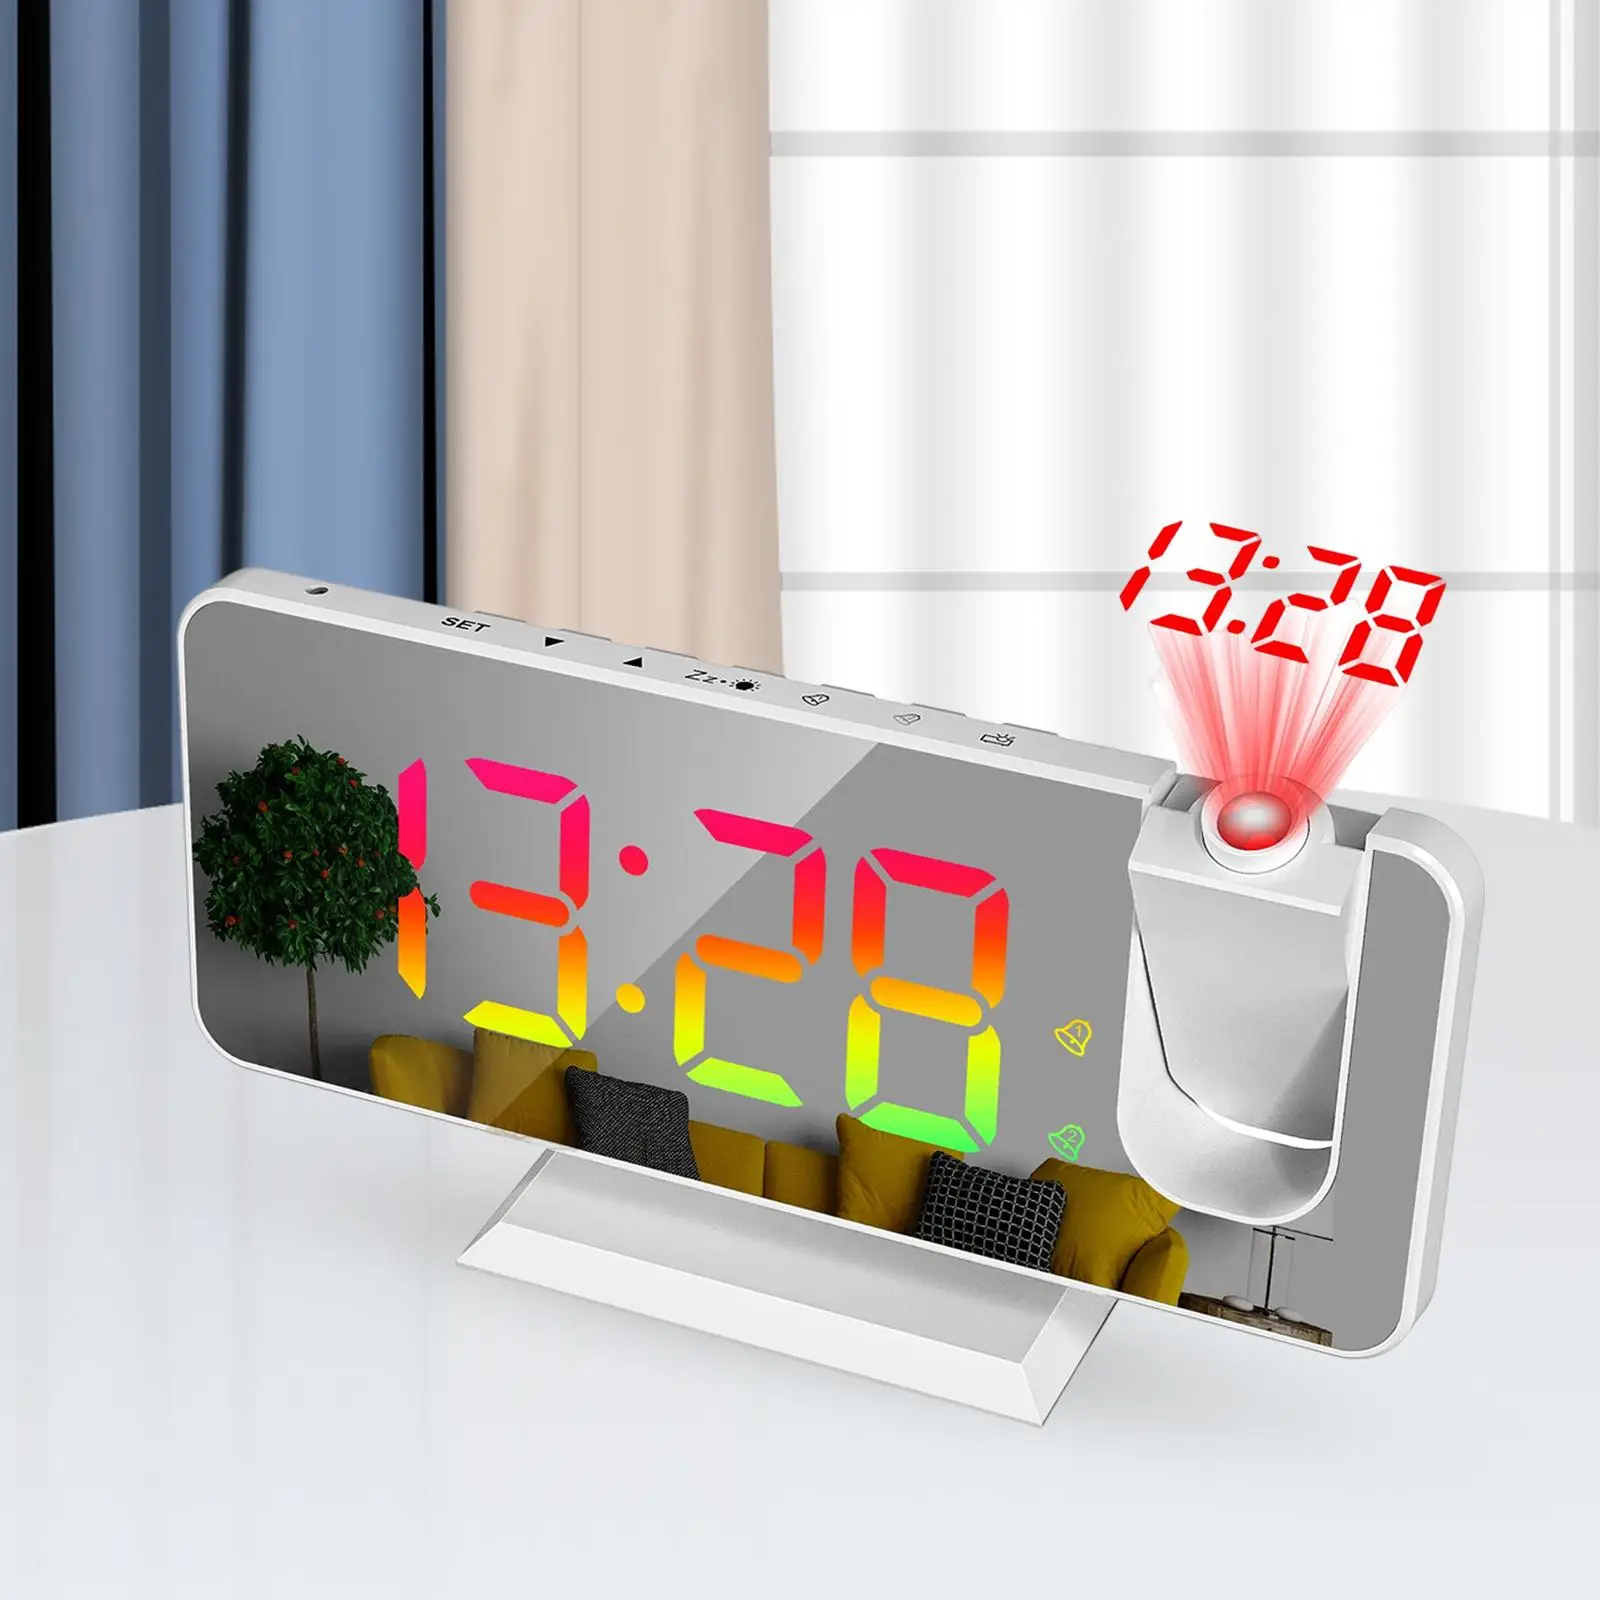 180 Rotation Projection Alarm Clock Colorful LED Digital Bedside Desktop Clock USB Powered Snooze 12/24H Large Screen Mirrored